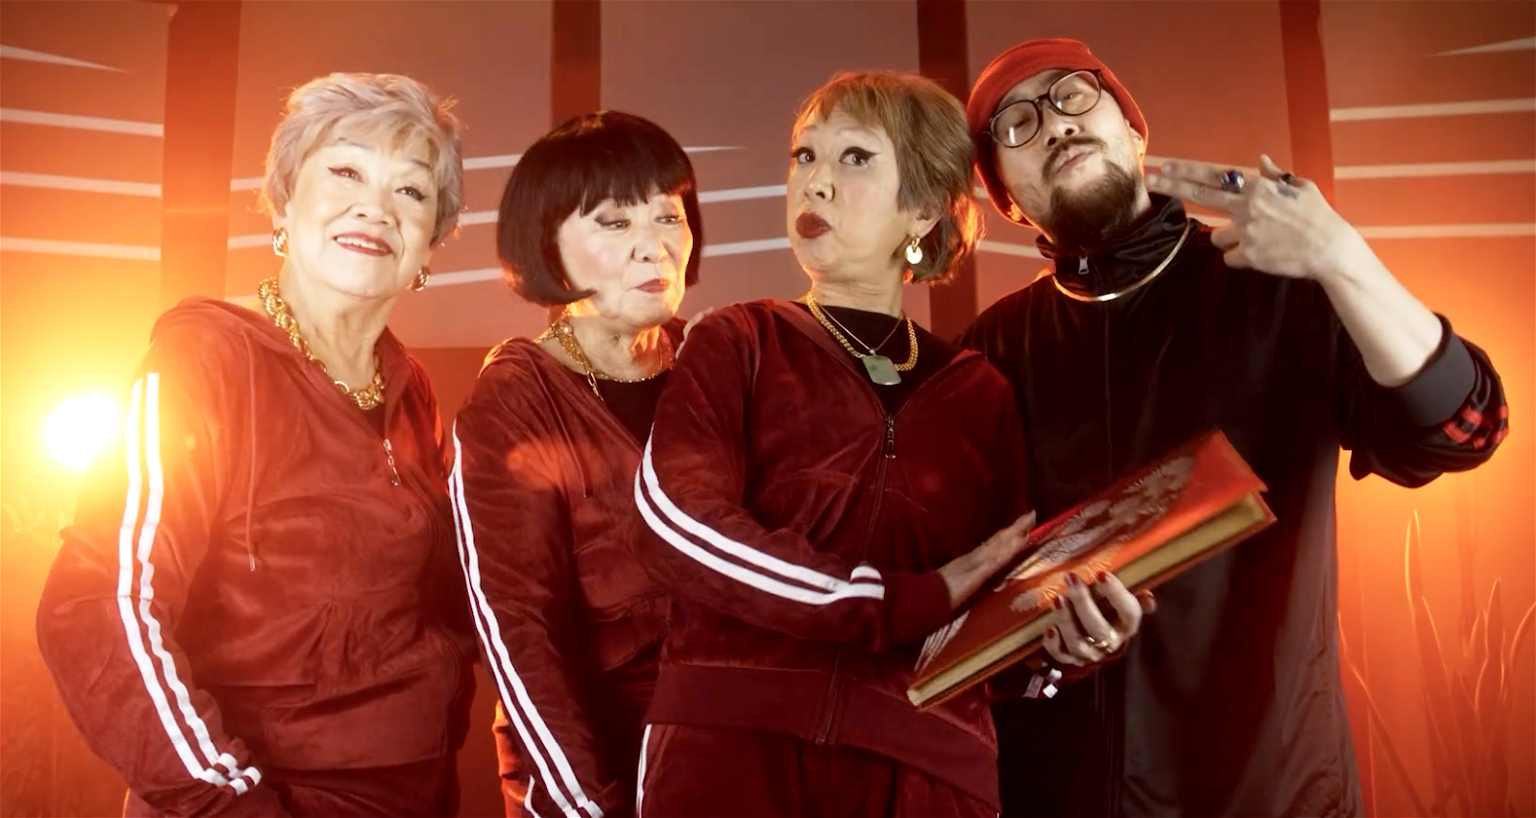 ‘We here and we rappin’: Bay Area seniors welcome Year of the Rabbit with rap music video